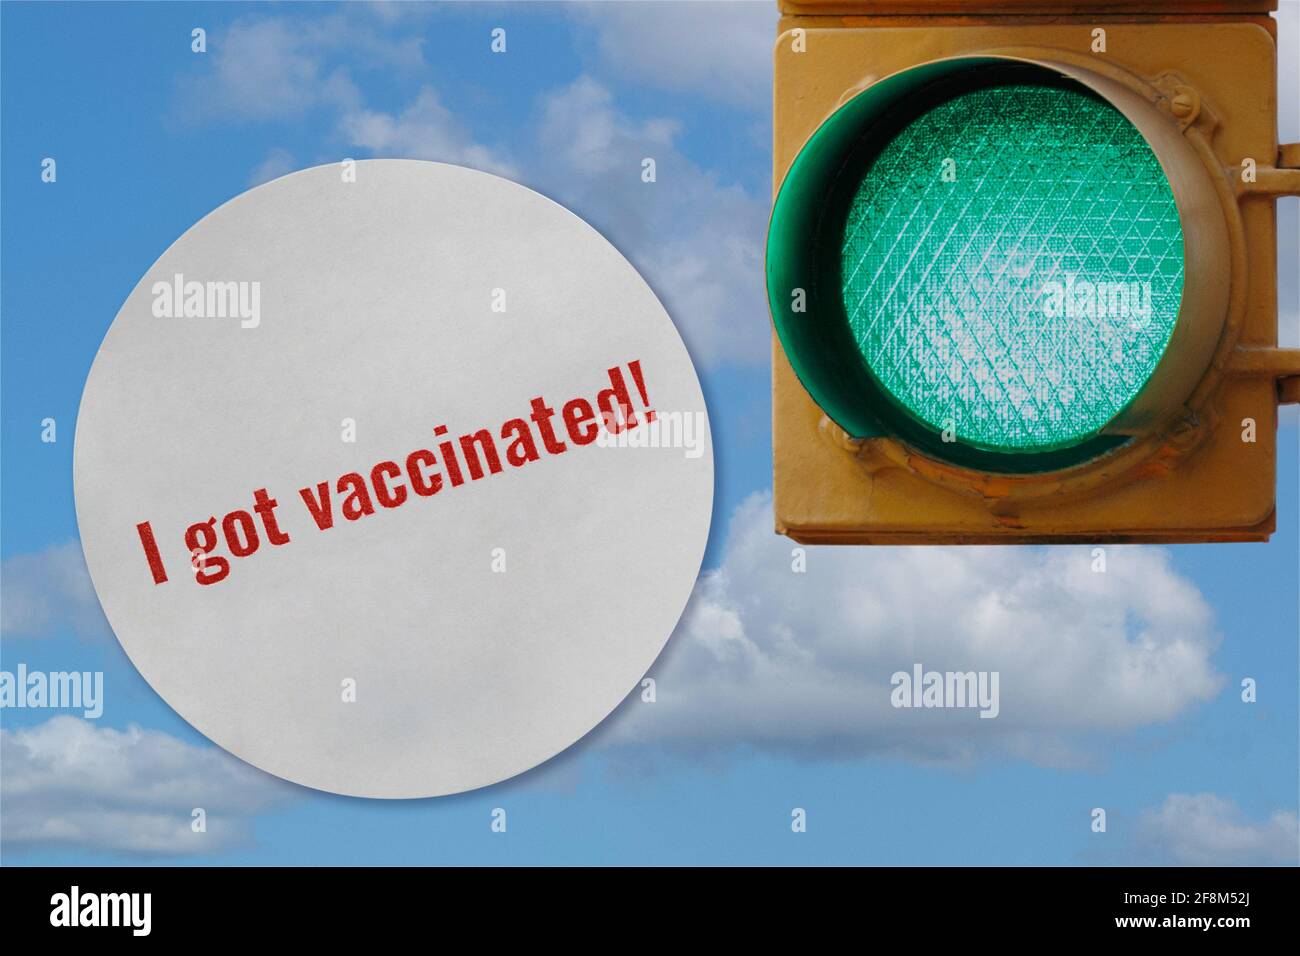 photo collage of a I got vaccinated sticker and a green traffic light against a sky, representing activities opening being allowed as more people get Stock Photo